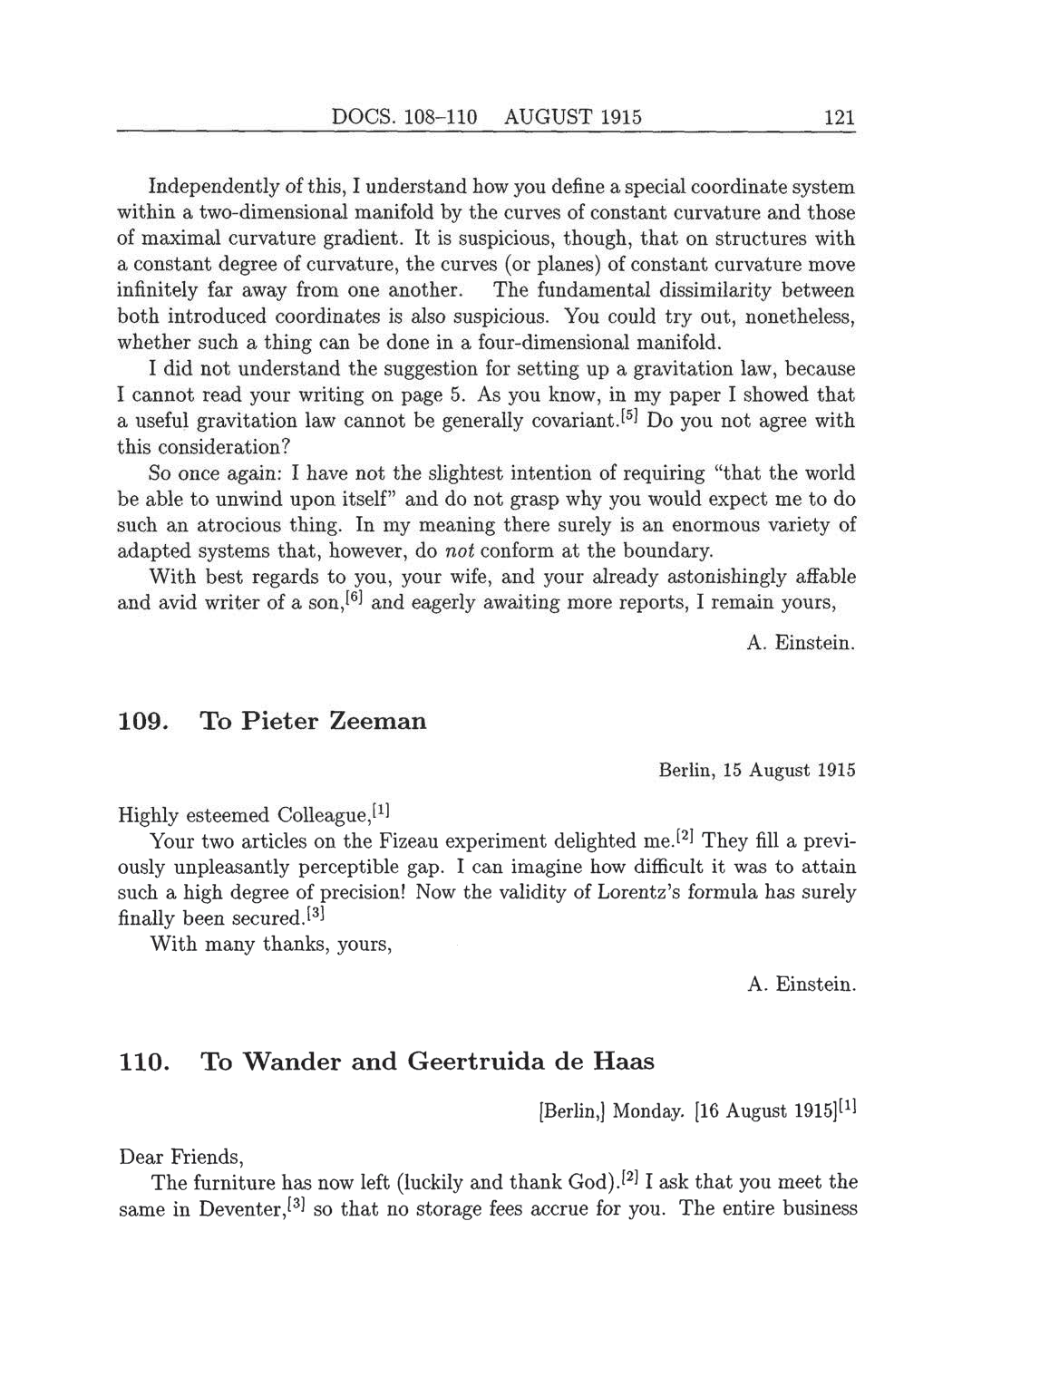 Volume 8: The Berlin Years: Correspondence, 1914-1918 (English translation supplement) page 121